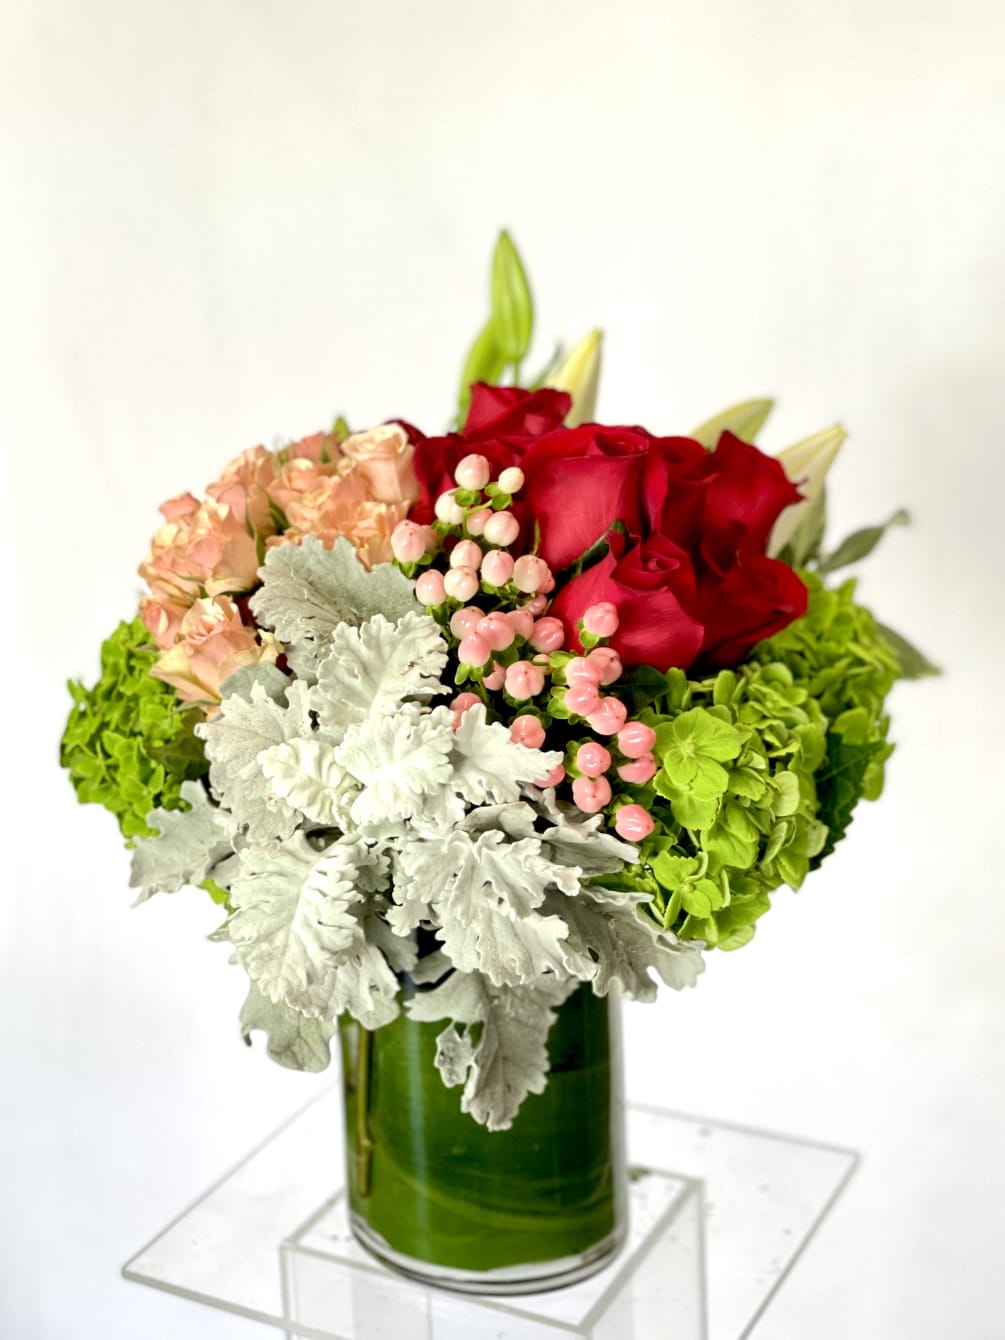 Red roses, peach spray roses, green hydrangeas, and asiatic lilies in a